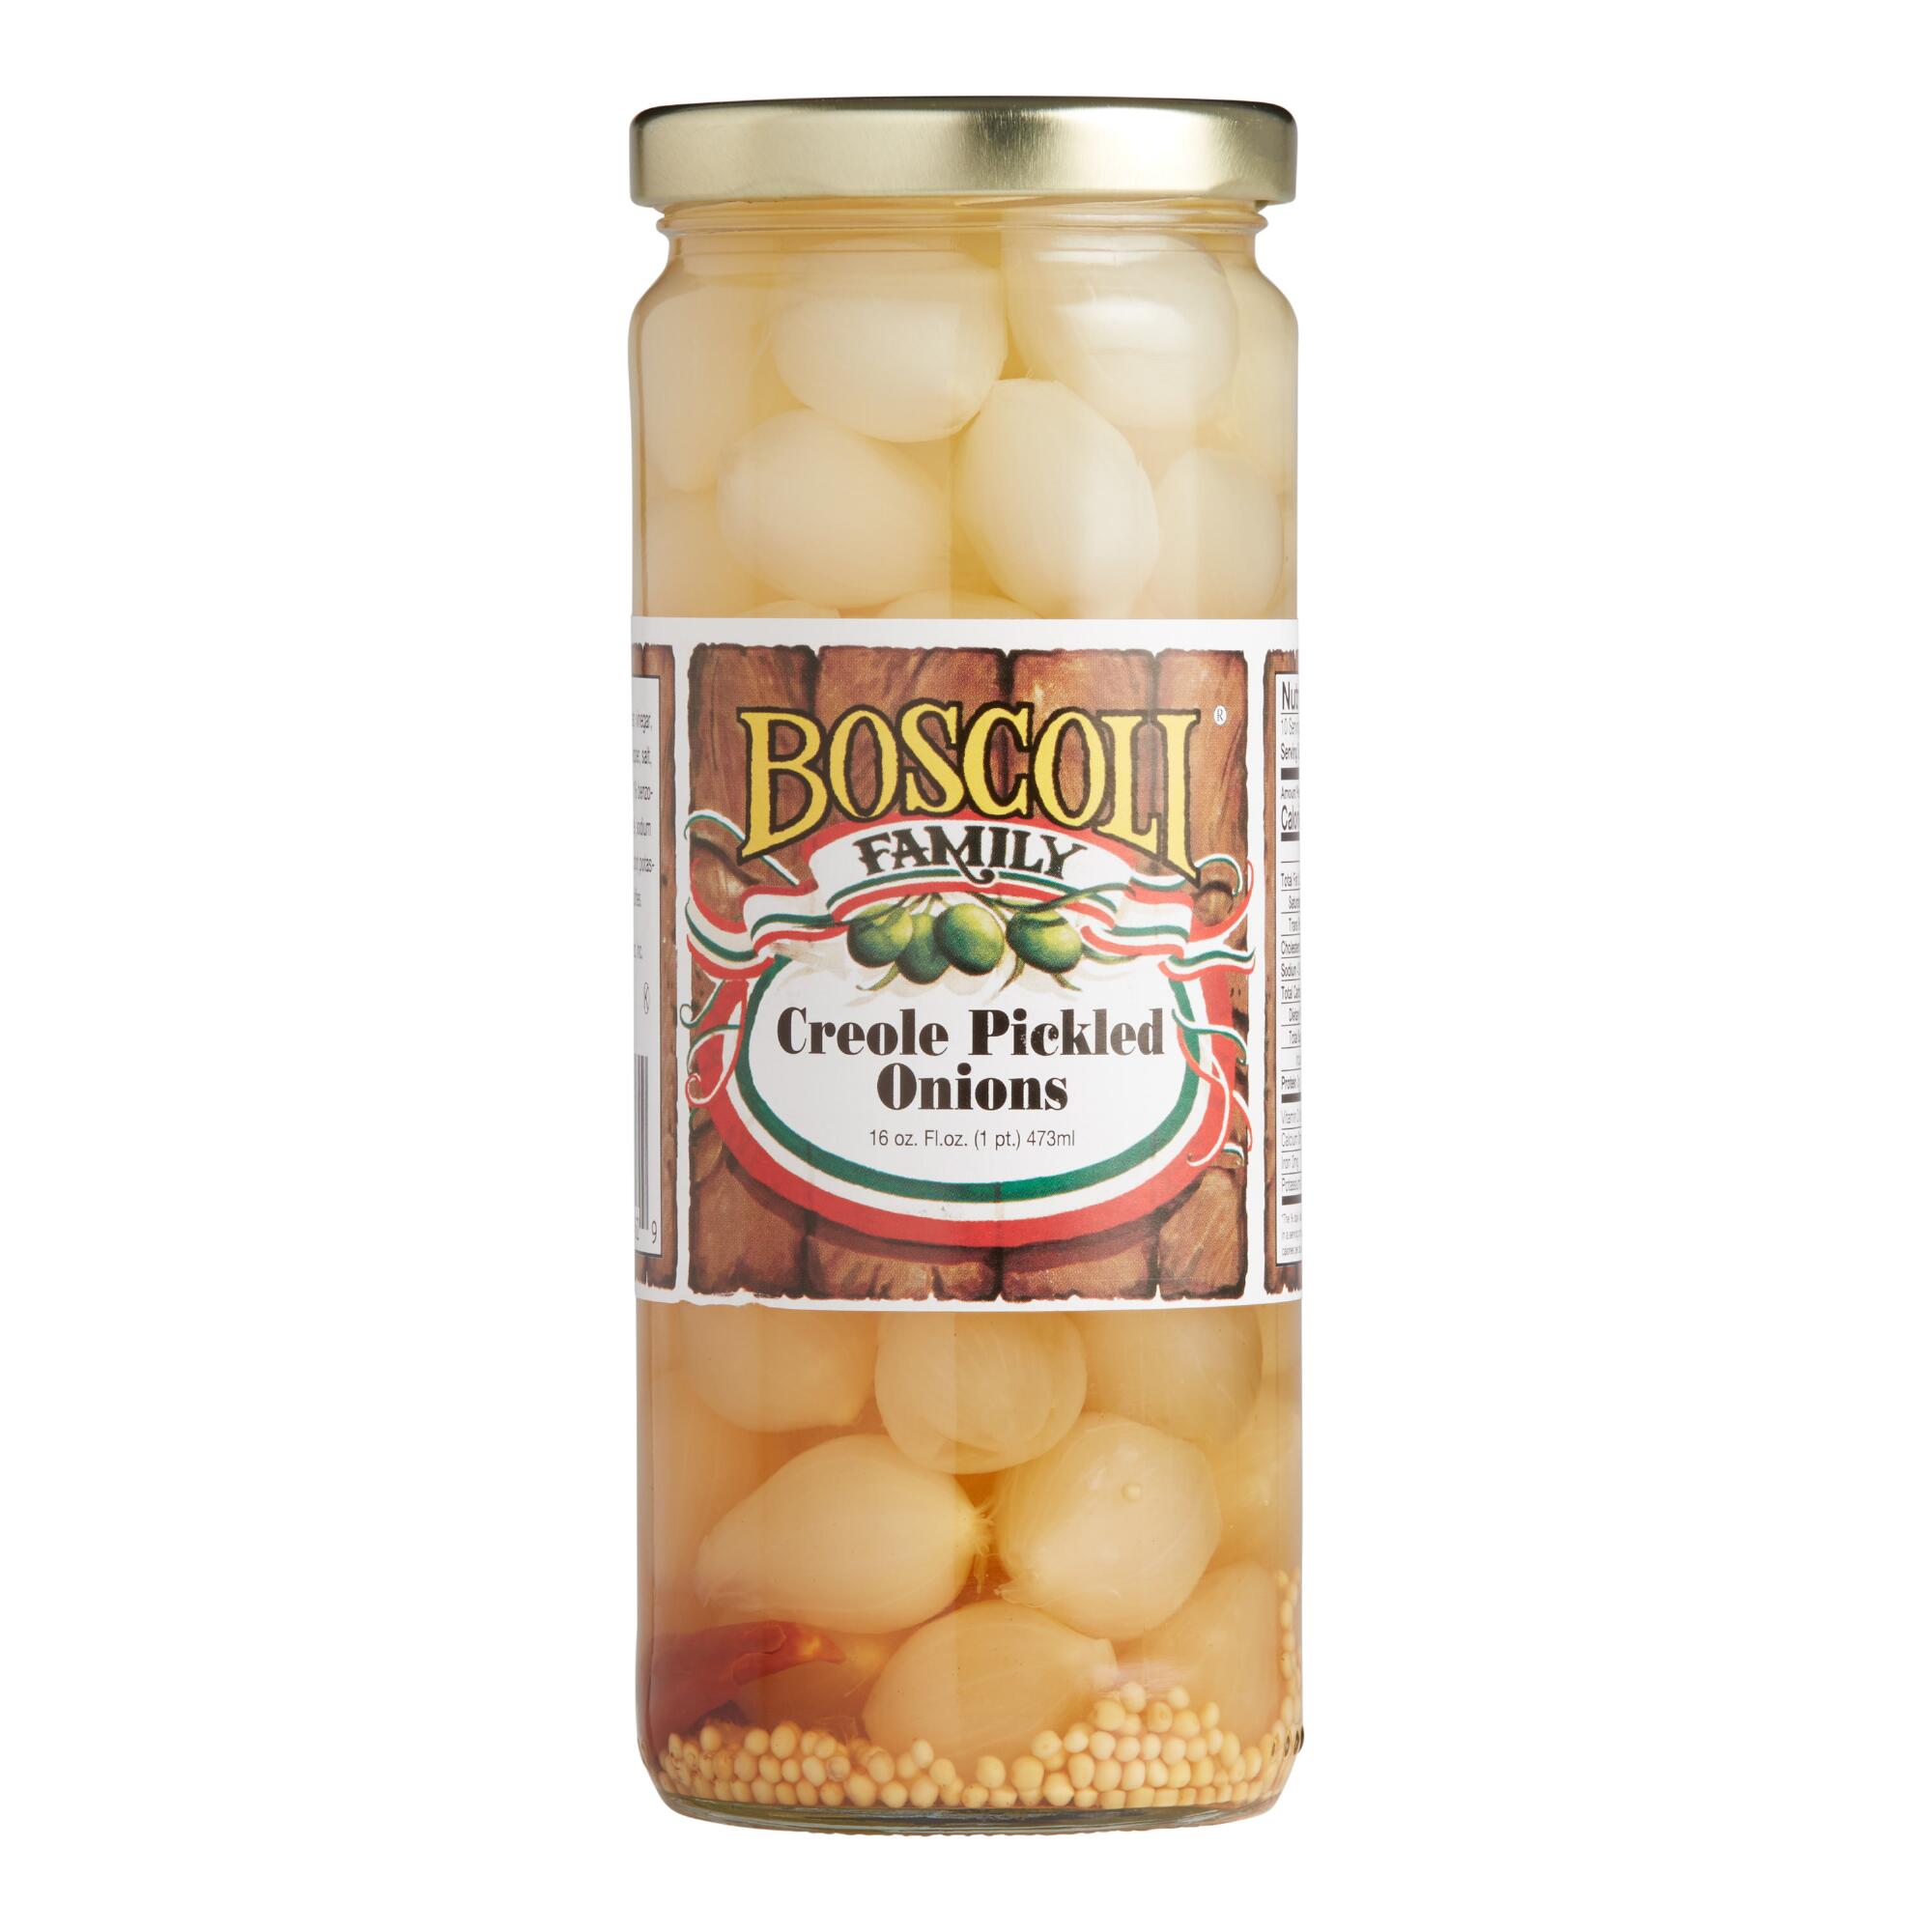 Boscoli Creole Pickled Onions by World Market